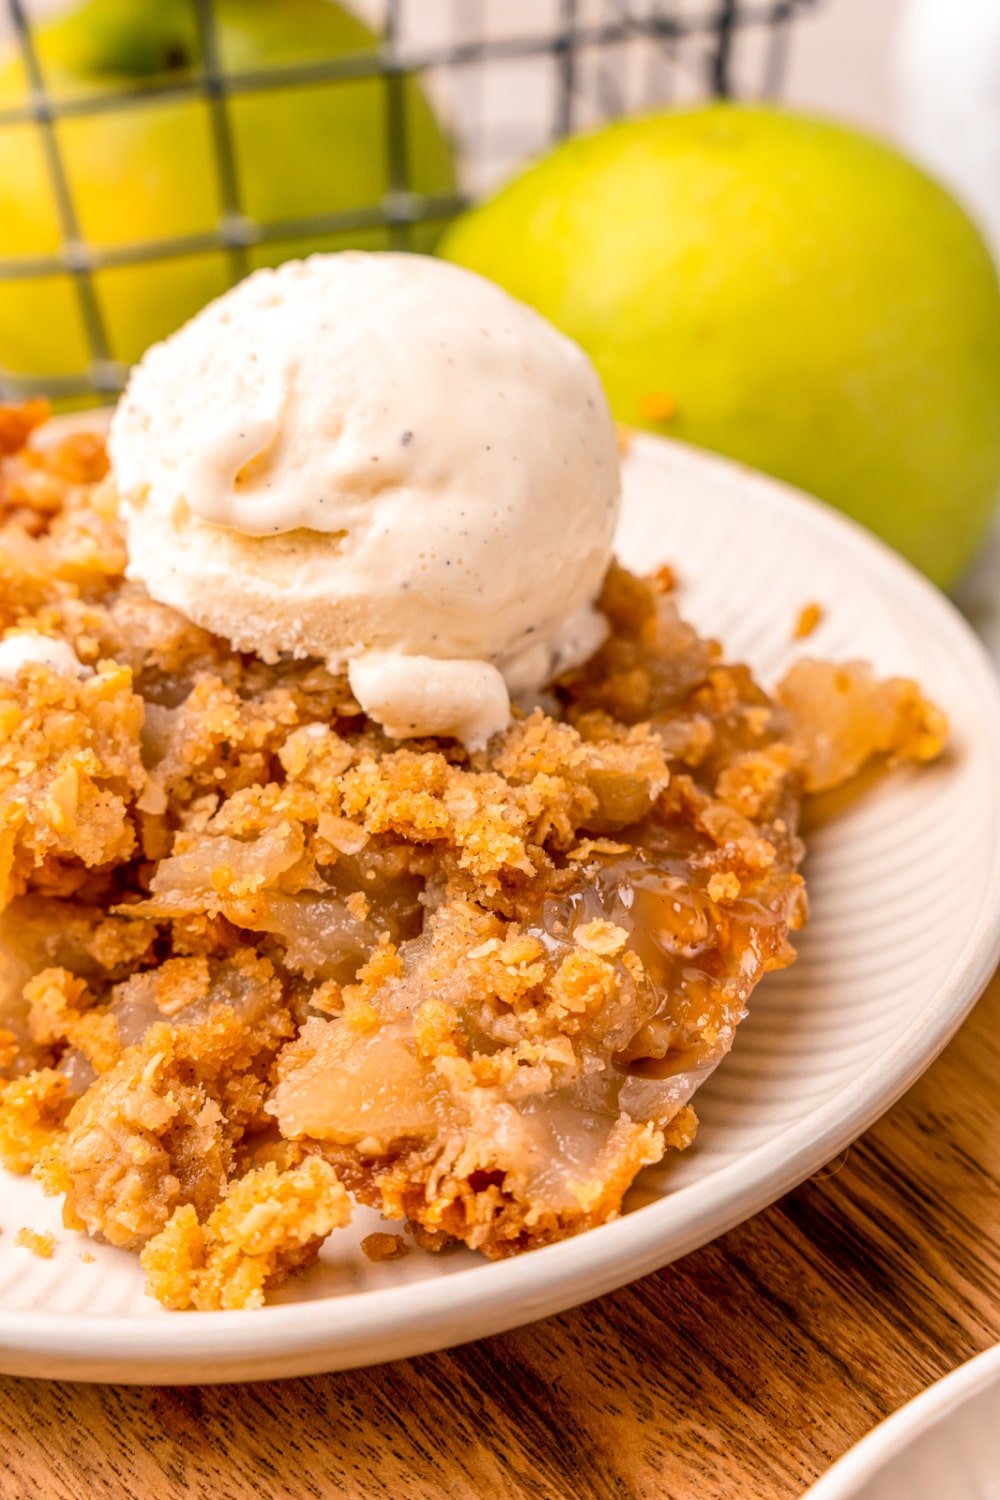 A bowl of baked Apple Crisp topped with a scoop of vanilla ice cream.